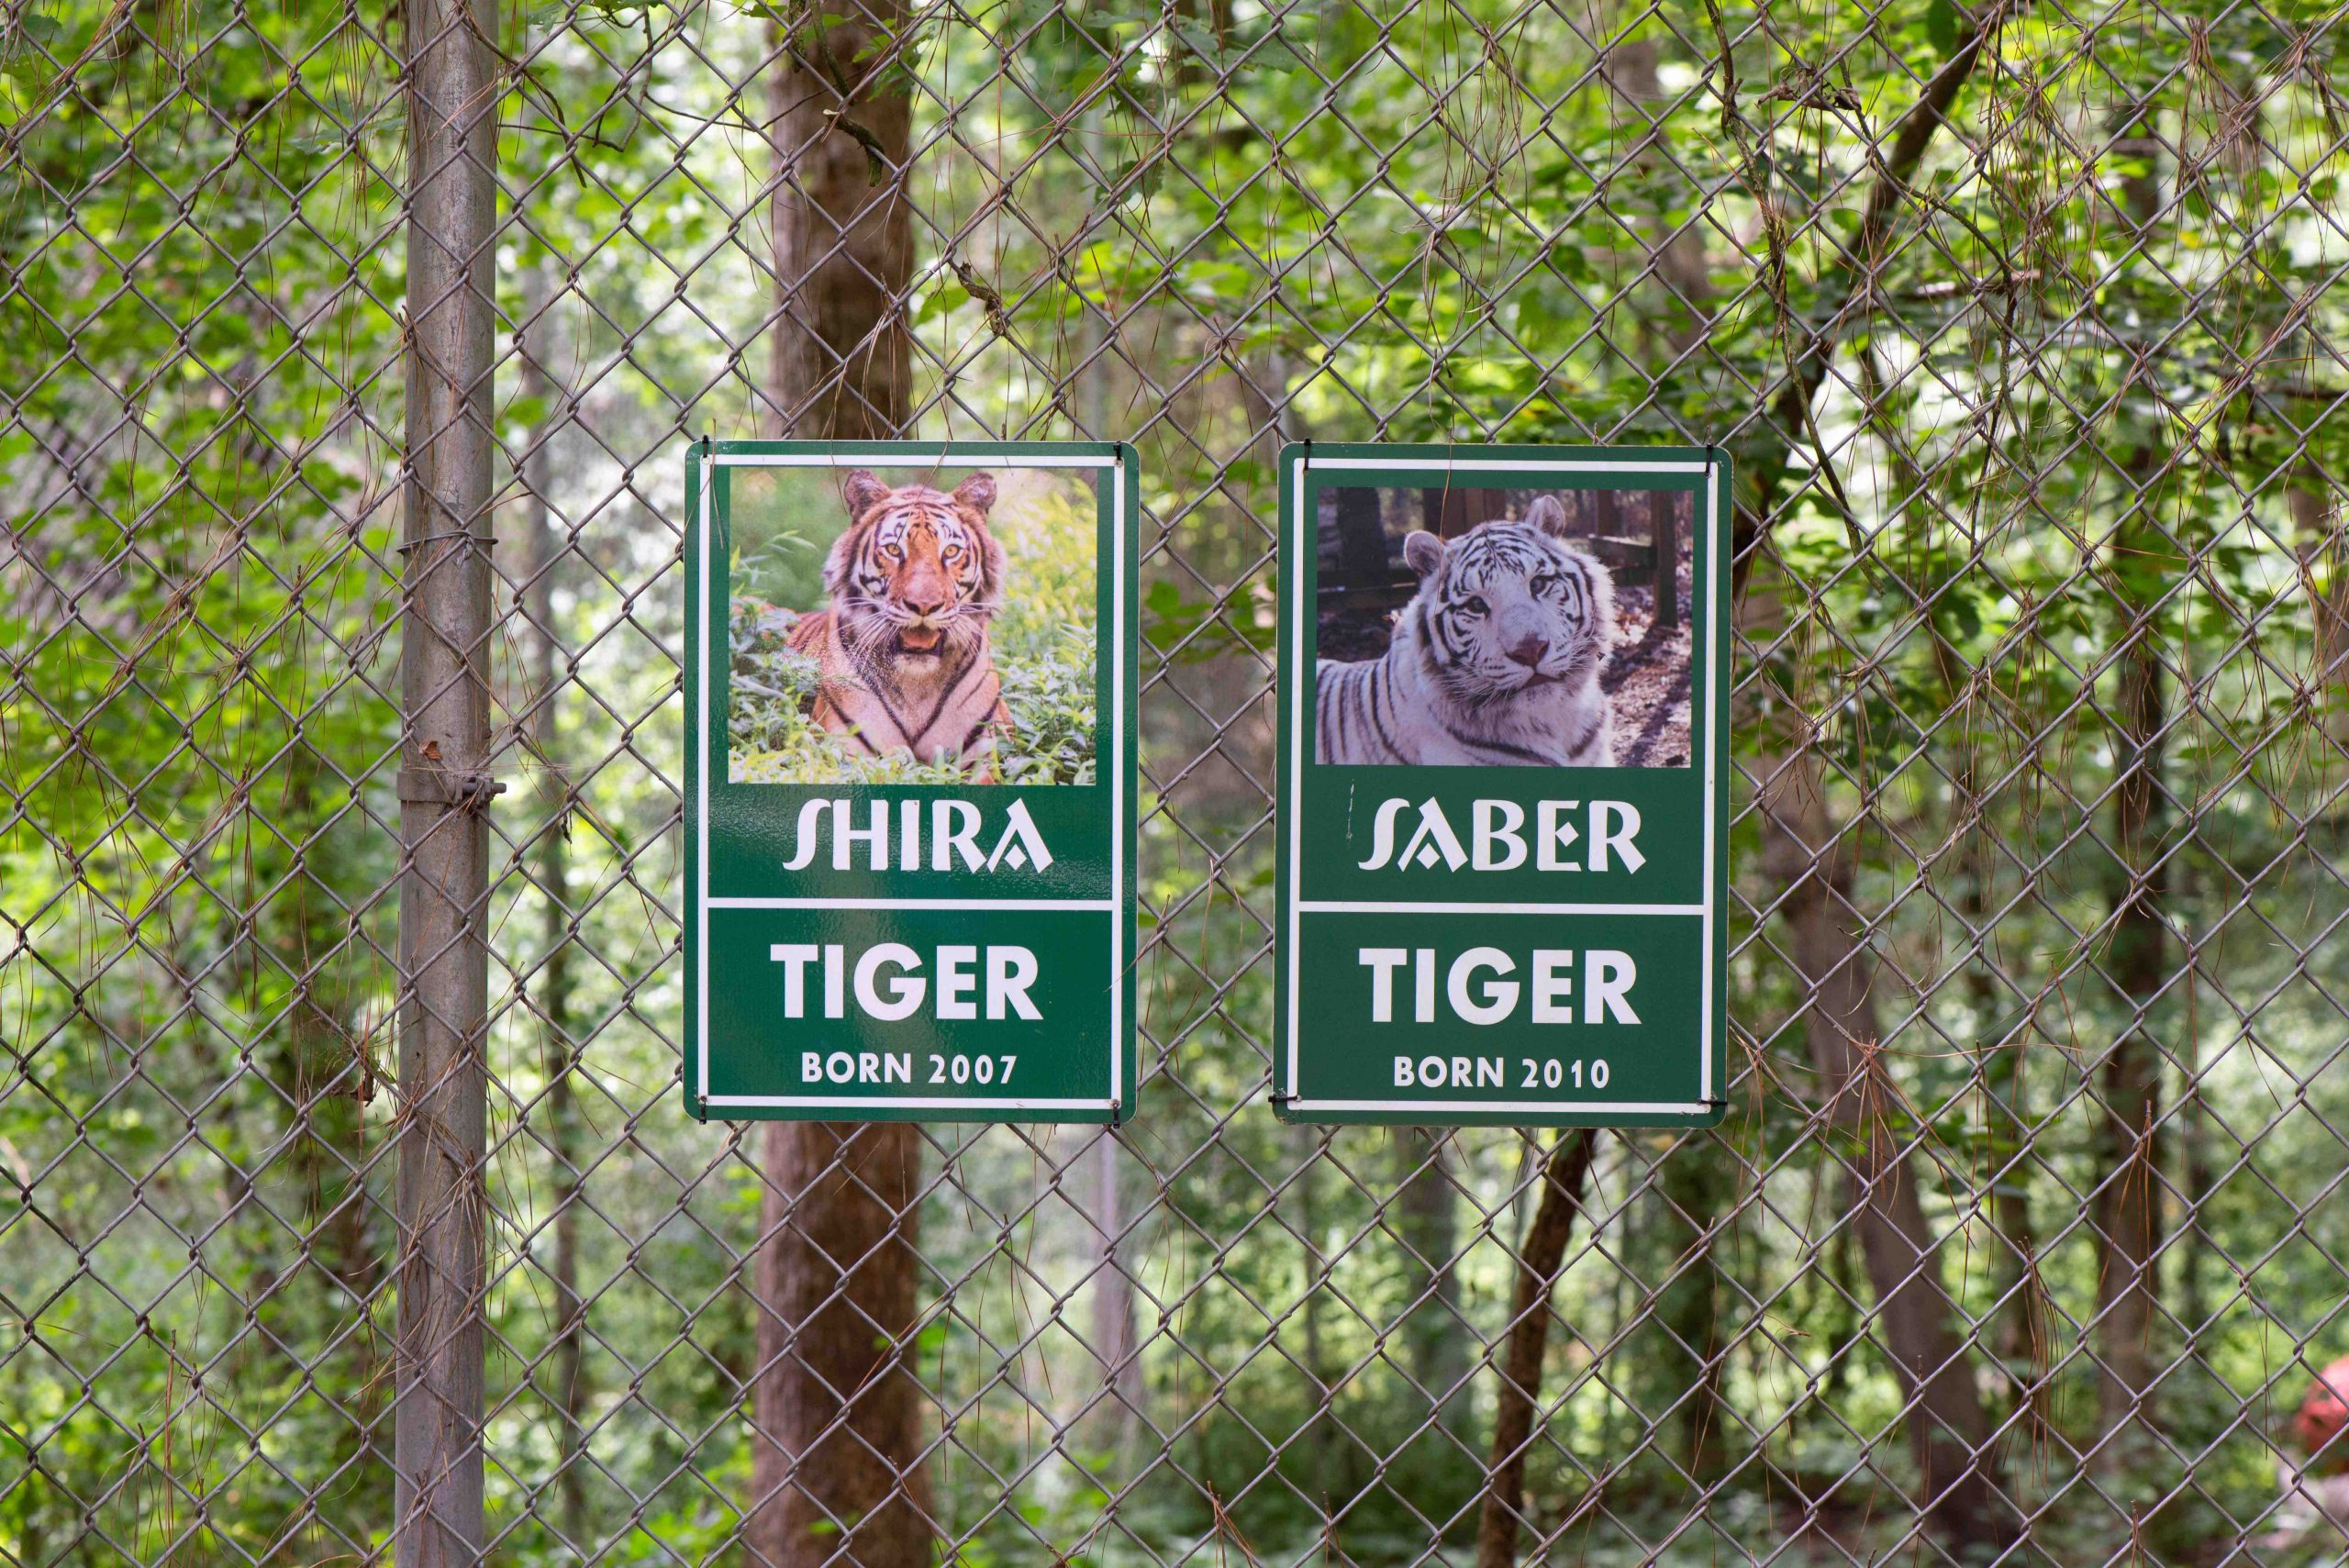 Tiger Enclosure featuring Two Tigers